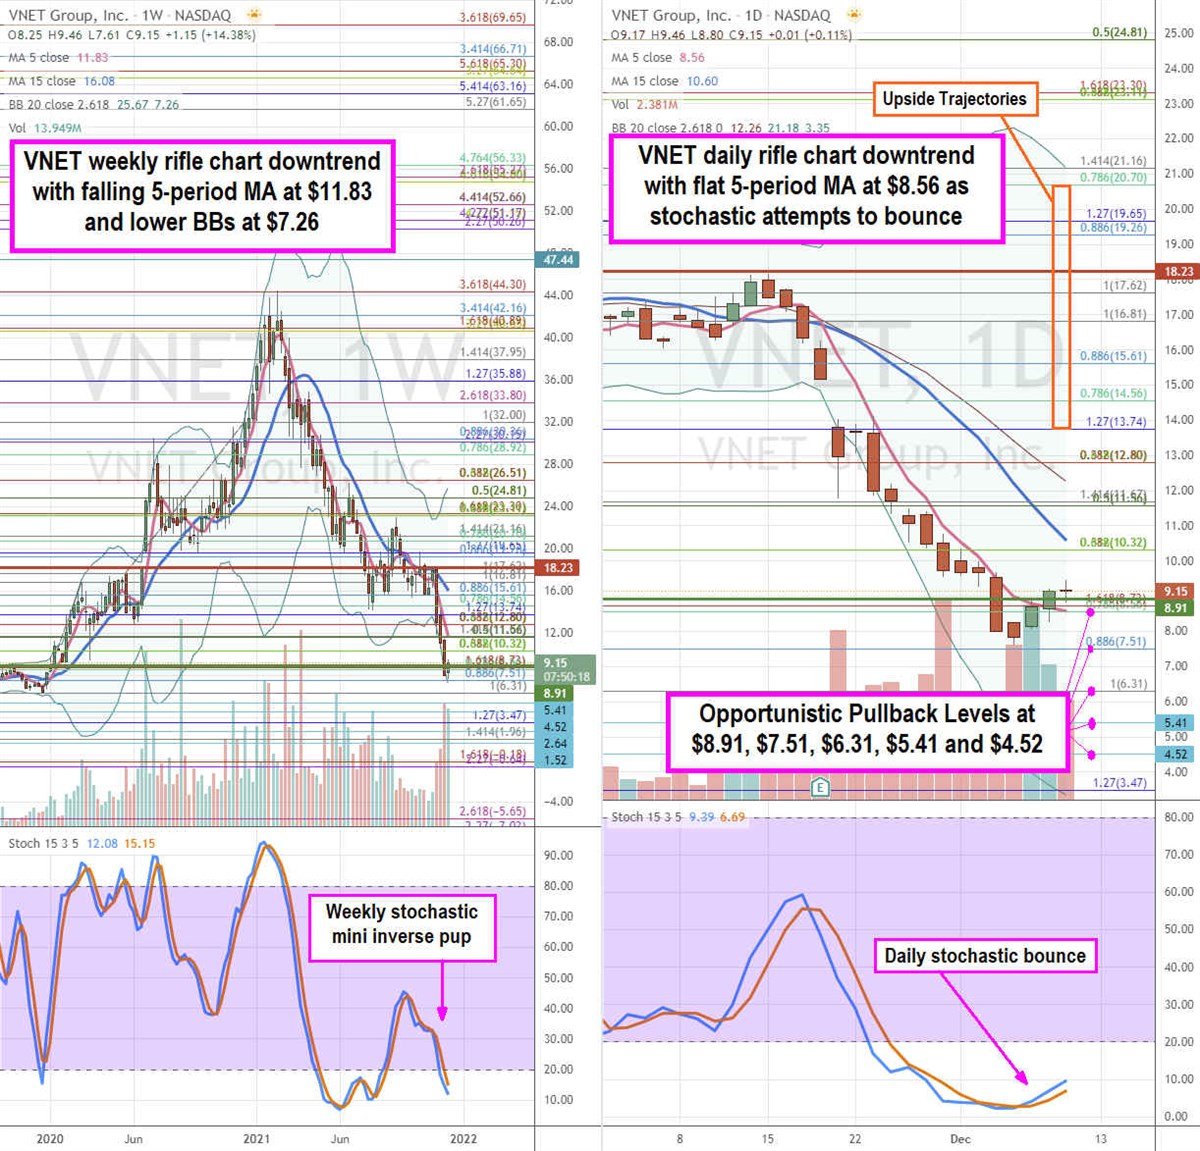 VNET weekly and daily charts.